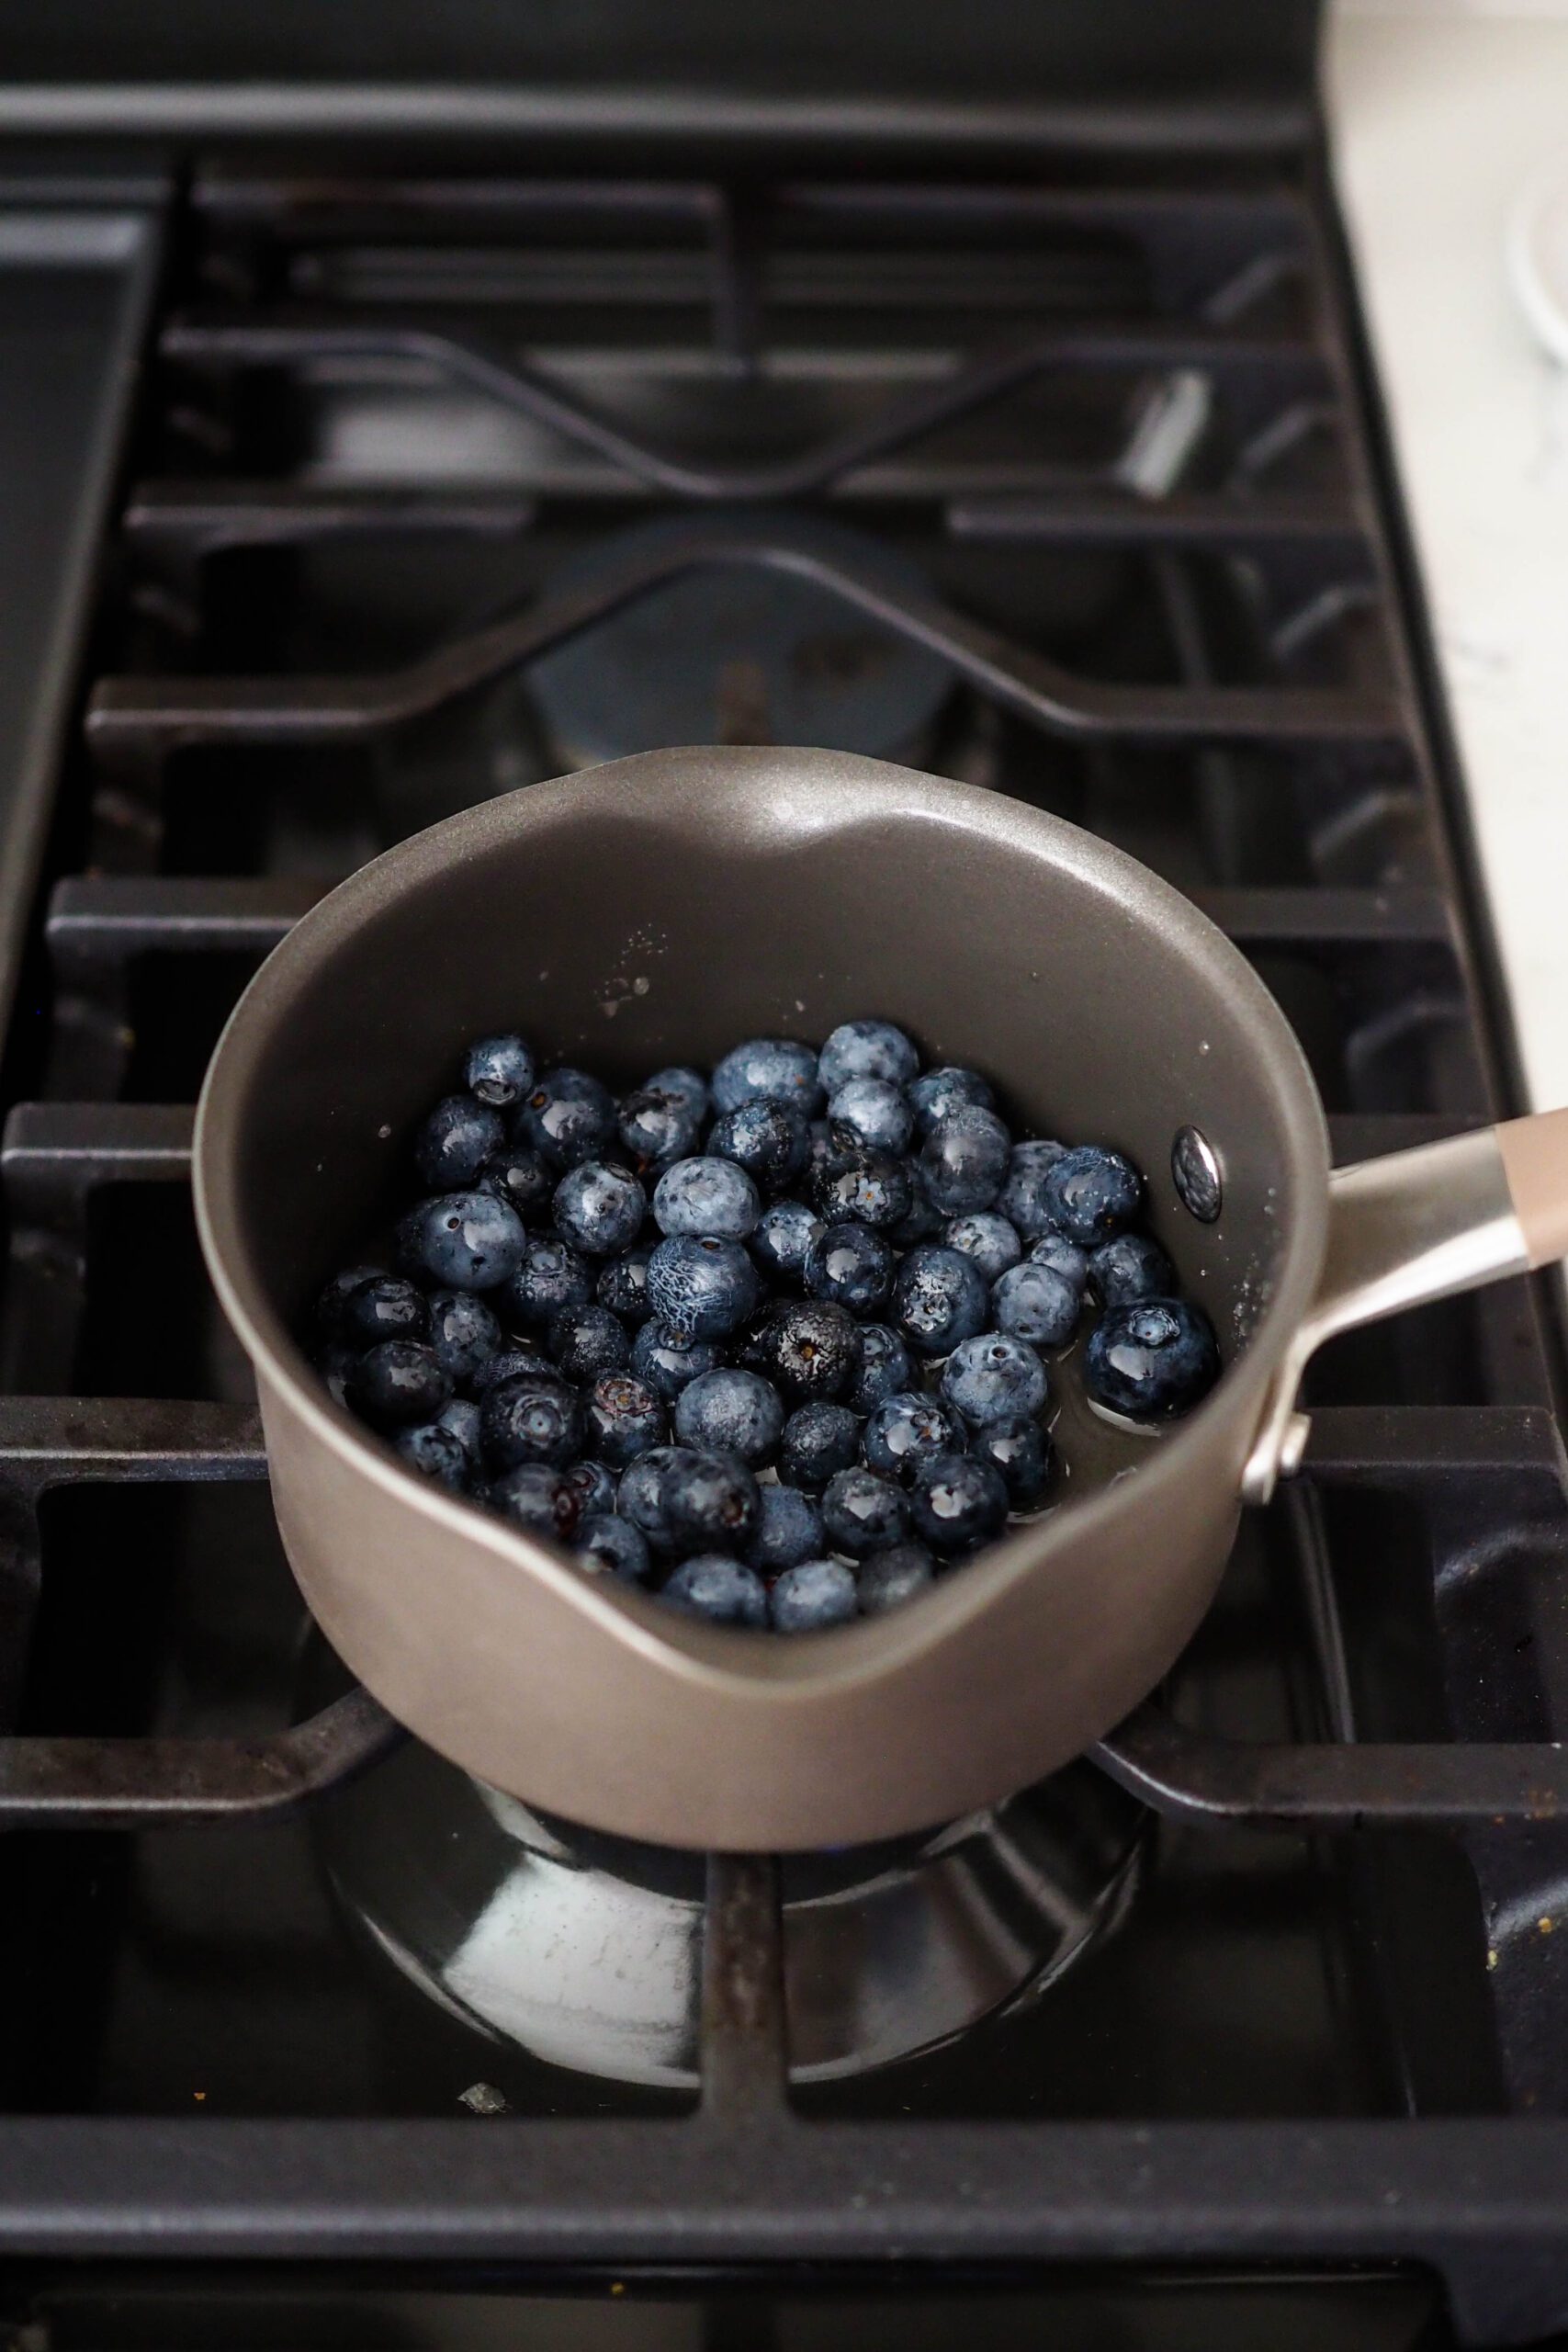 Blueberries in a small pot on the stove.